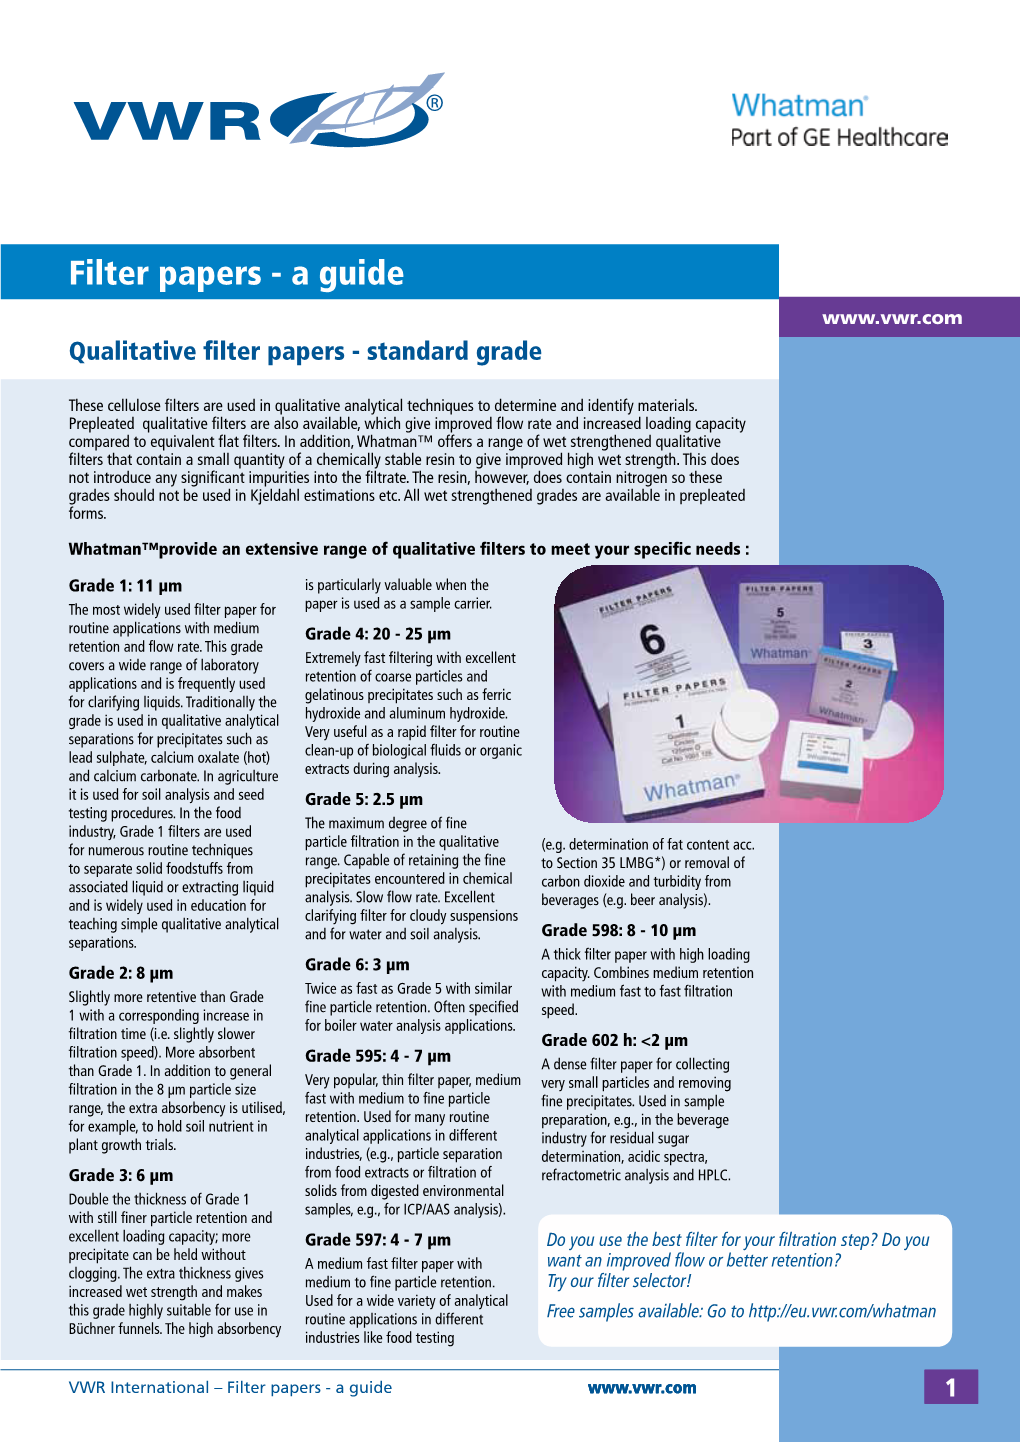 Filter Papers - a Guide Qualitative Filter Papers - Standard Grade